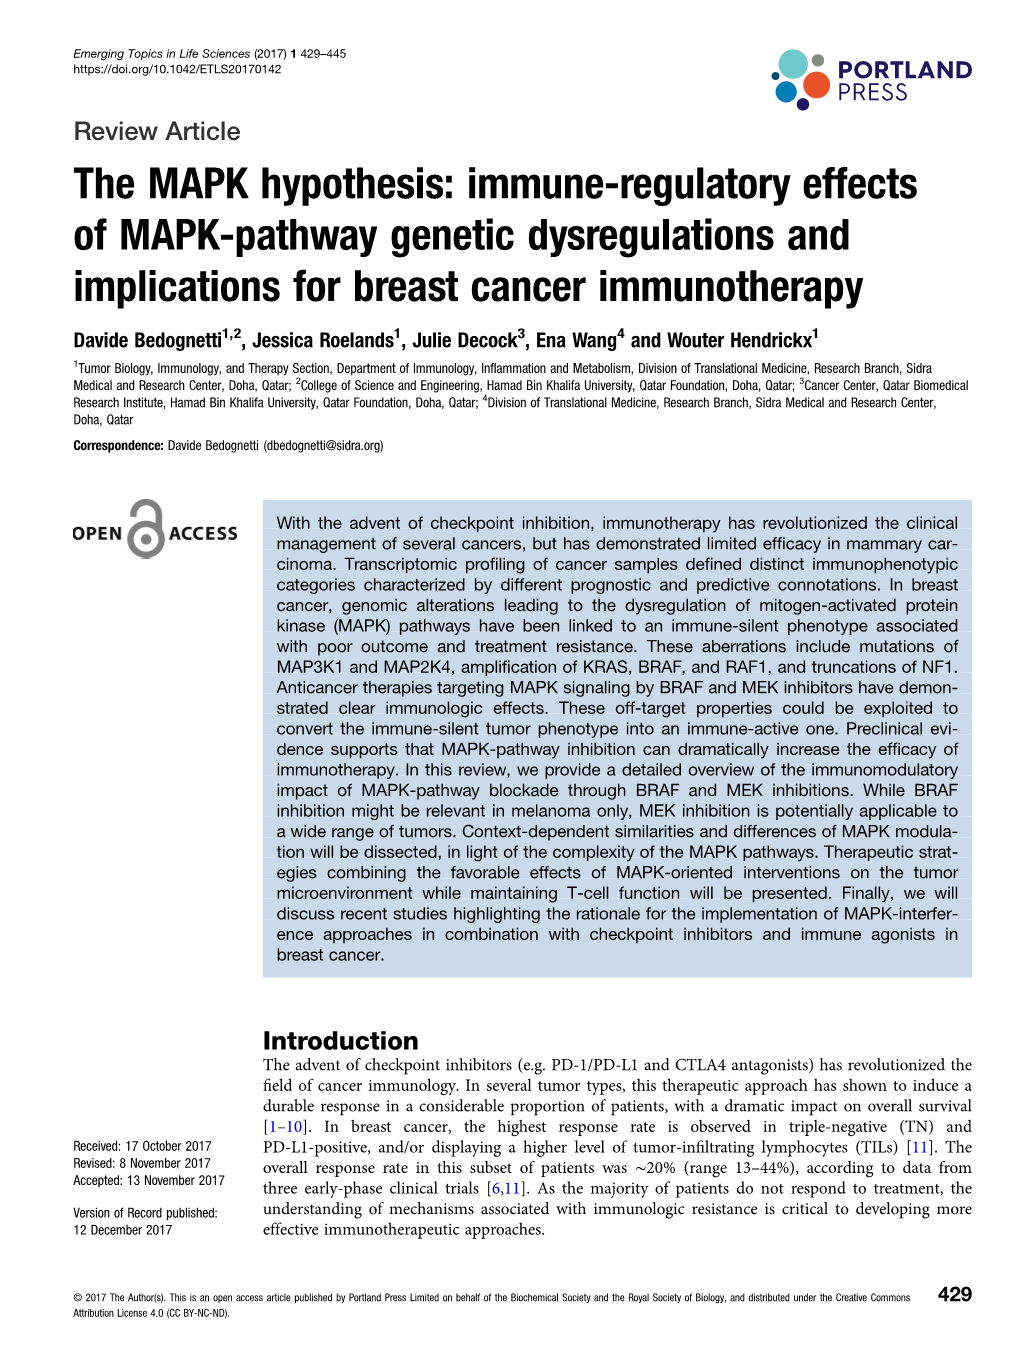 Immune-Regulatory Effects of MAPK-Pathway Genetic Dysregulations and Implications for Breast Cancer Immunotherapy